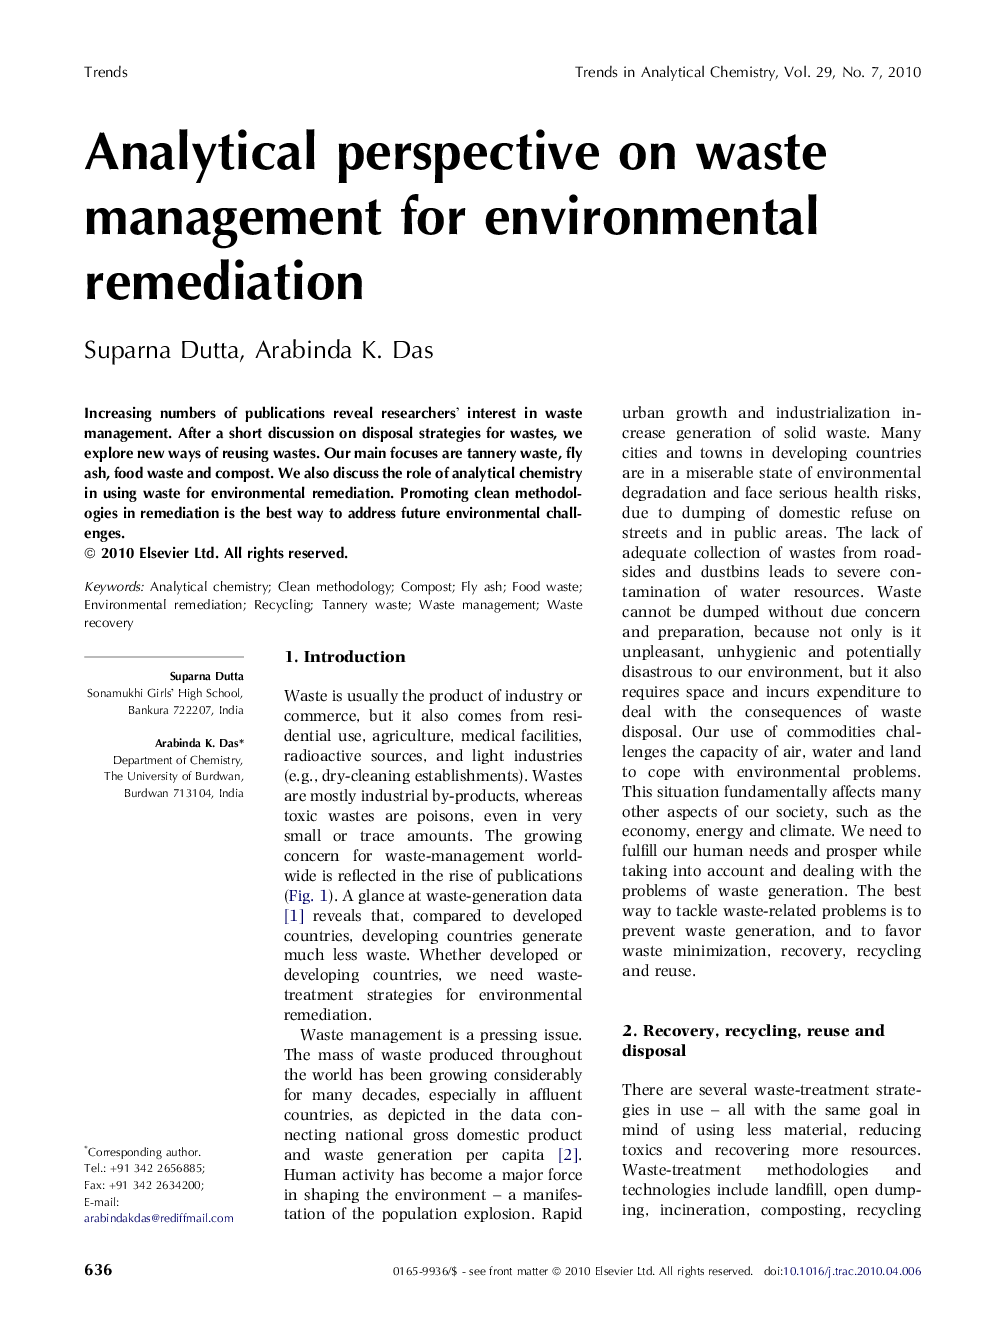 Analytical perspective on waste management for environmental remediation